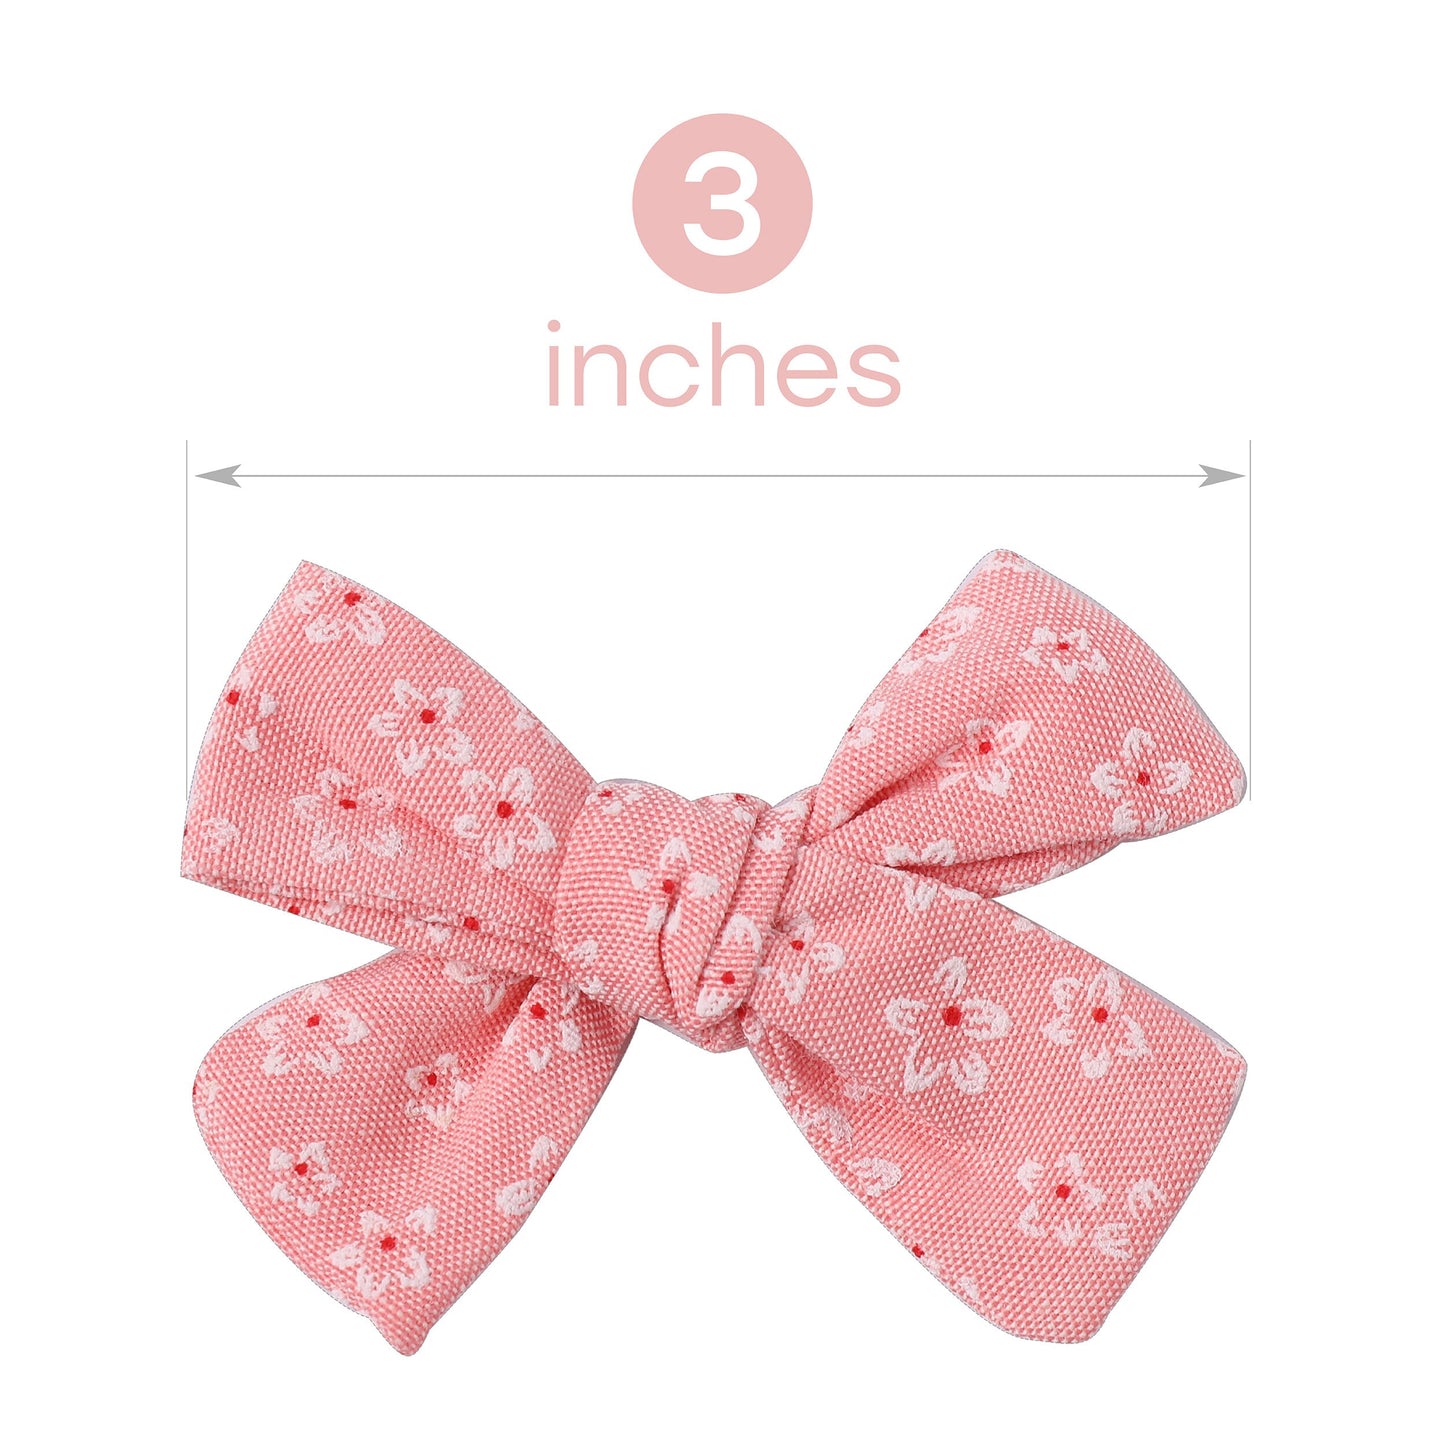 Linen hair bow clips bows for toddlers girls, school bow bows hair clips for girls barrettes alligator clip